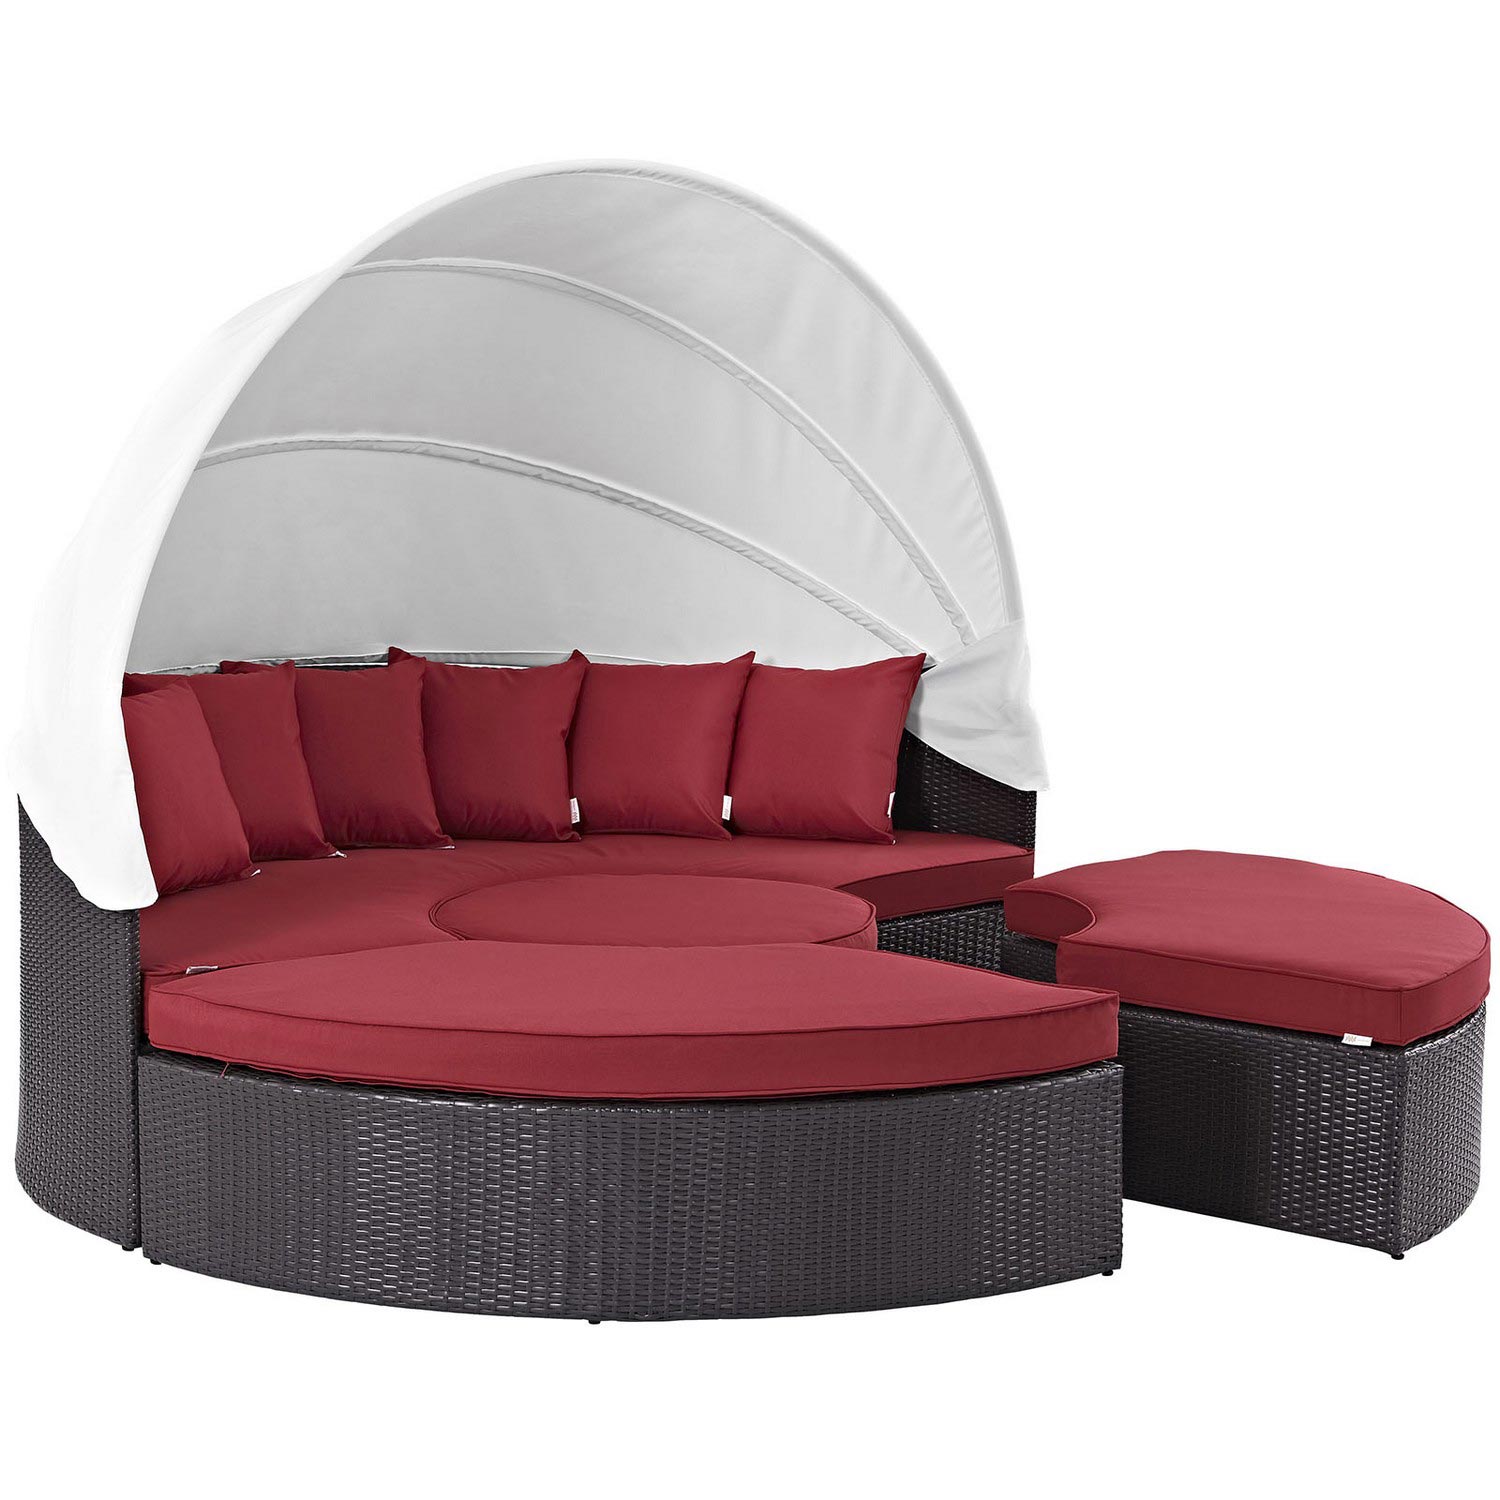 Modway Convene Canopy Outdoor Patio Daybed - Espresso/Red